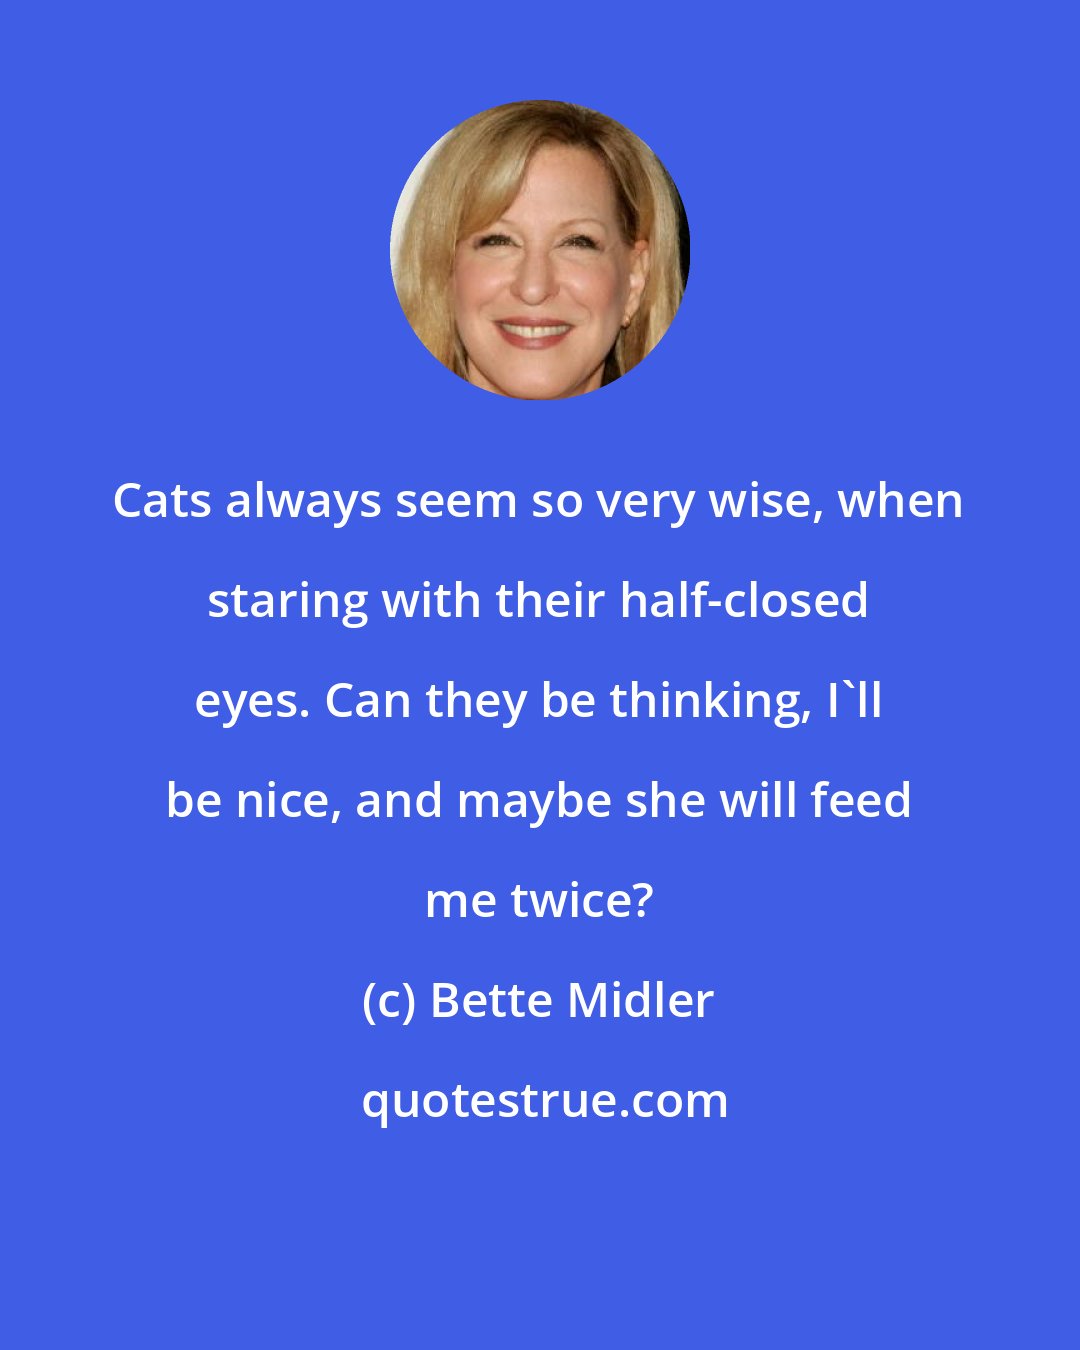 Bette Midler: Cats always seem so very wise, when staring with their half-closed eyes. Can they be thinking, I'll be nice, and maybe she will feed me twice?